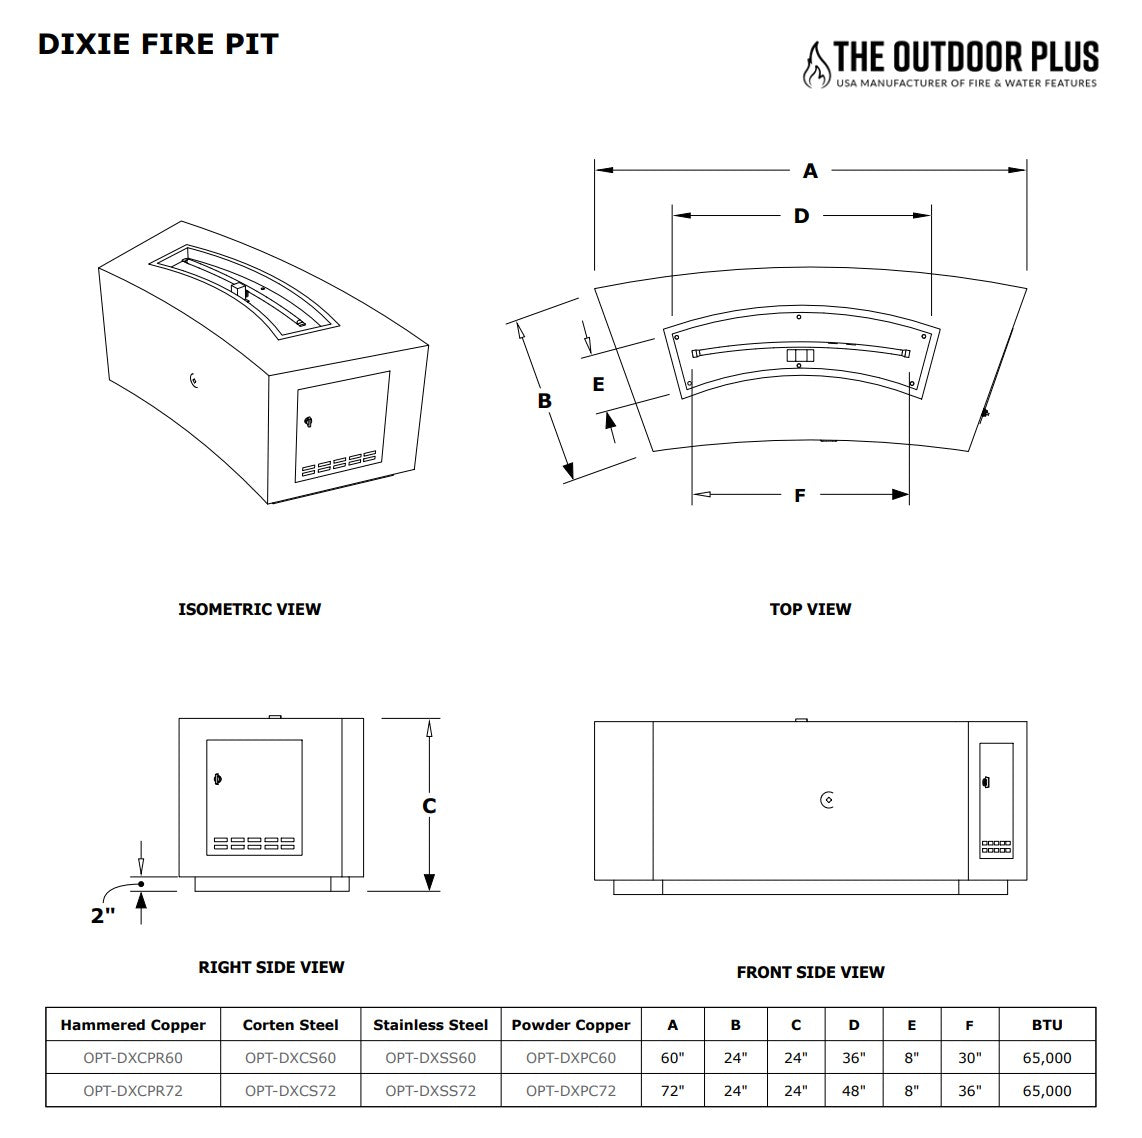 The Outdoor Plus Dixie Fire Pit - Free Cover